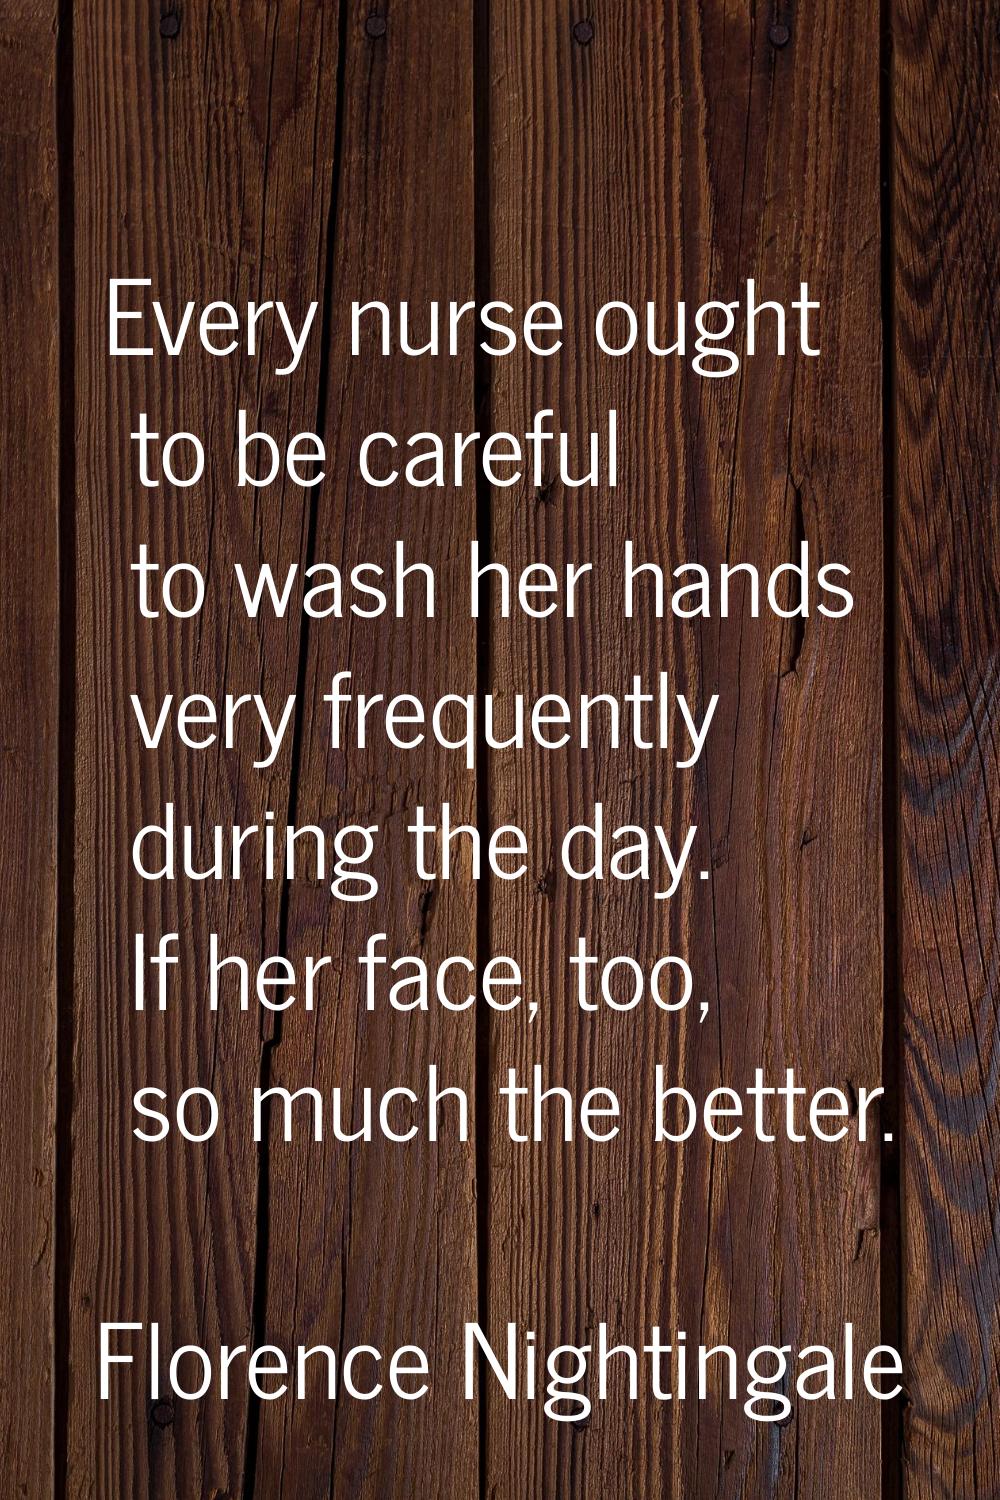 Every nurse ought to be careful to wash her hands very frequently during the day. If her face, too,